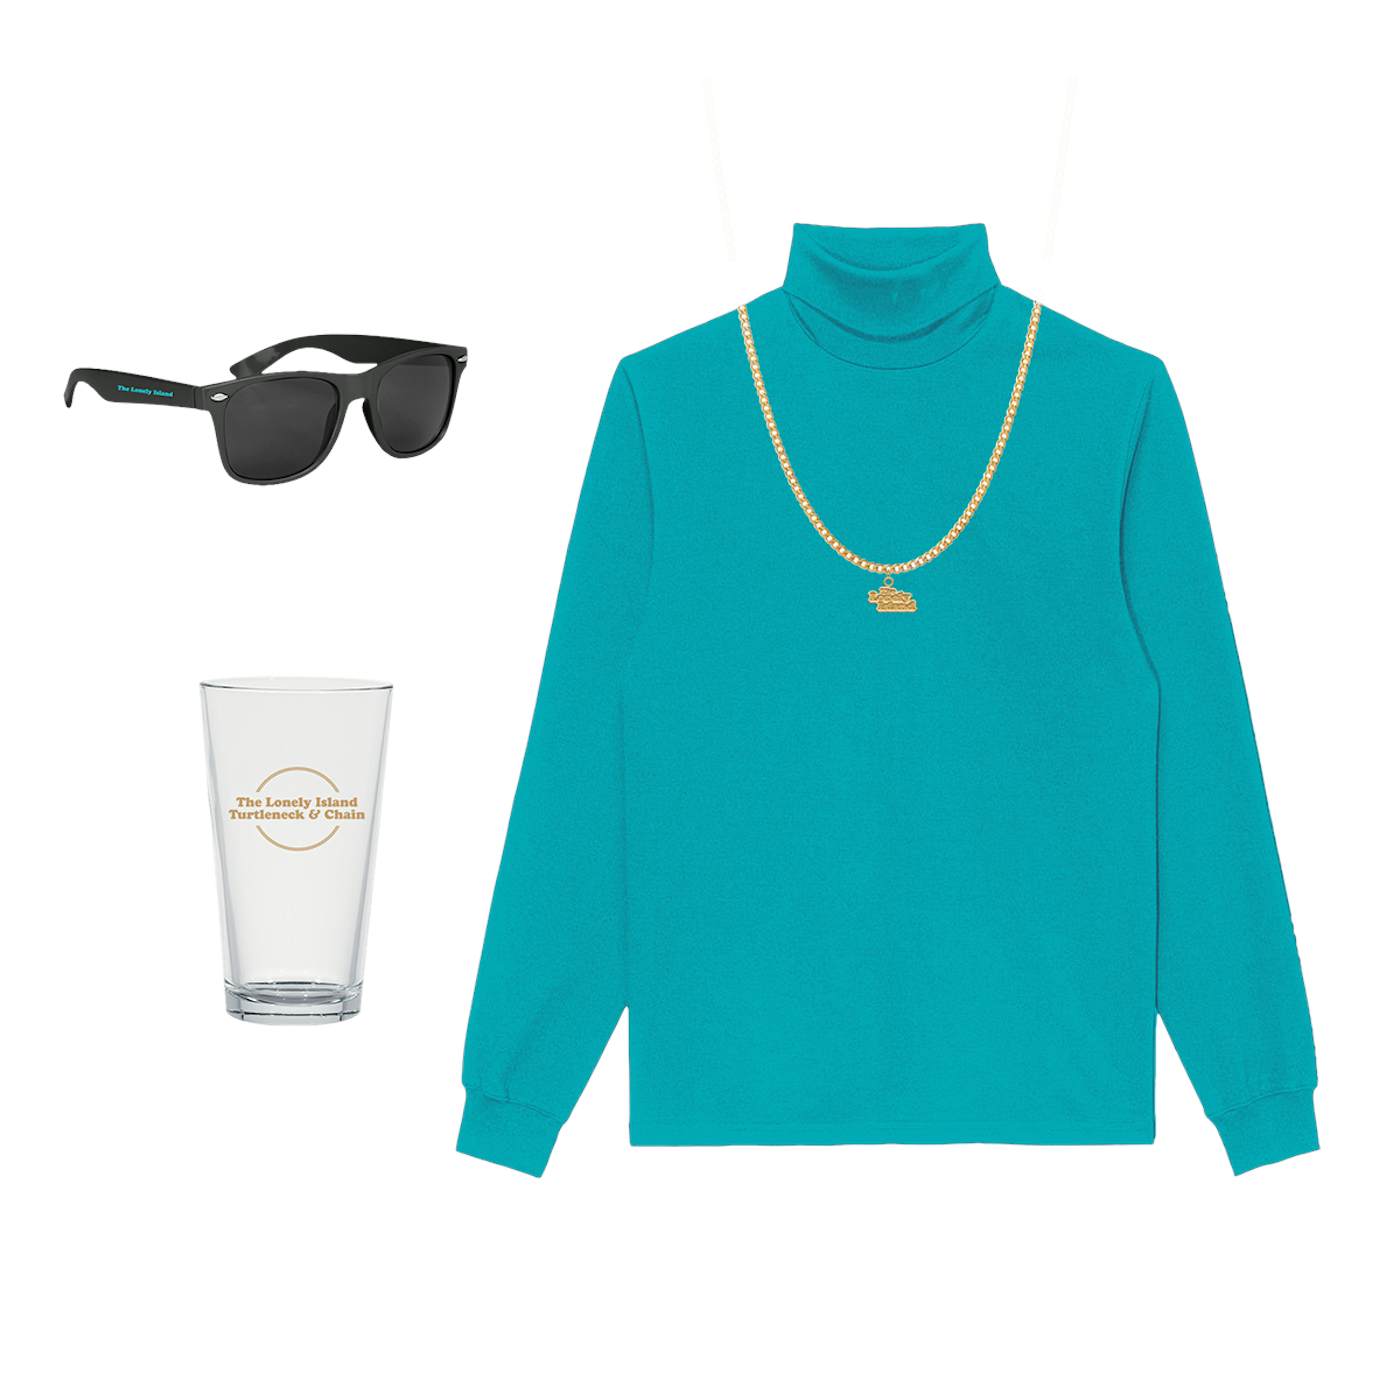 The Lonely Island Turtleneck & Chain Bundle